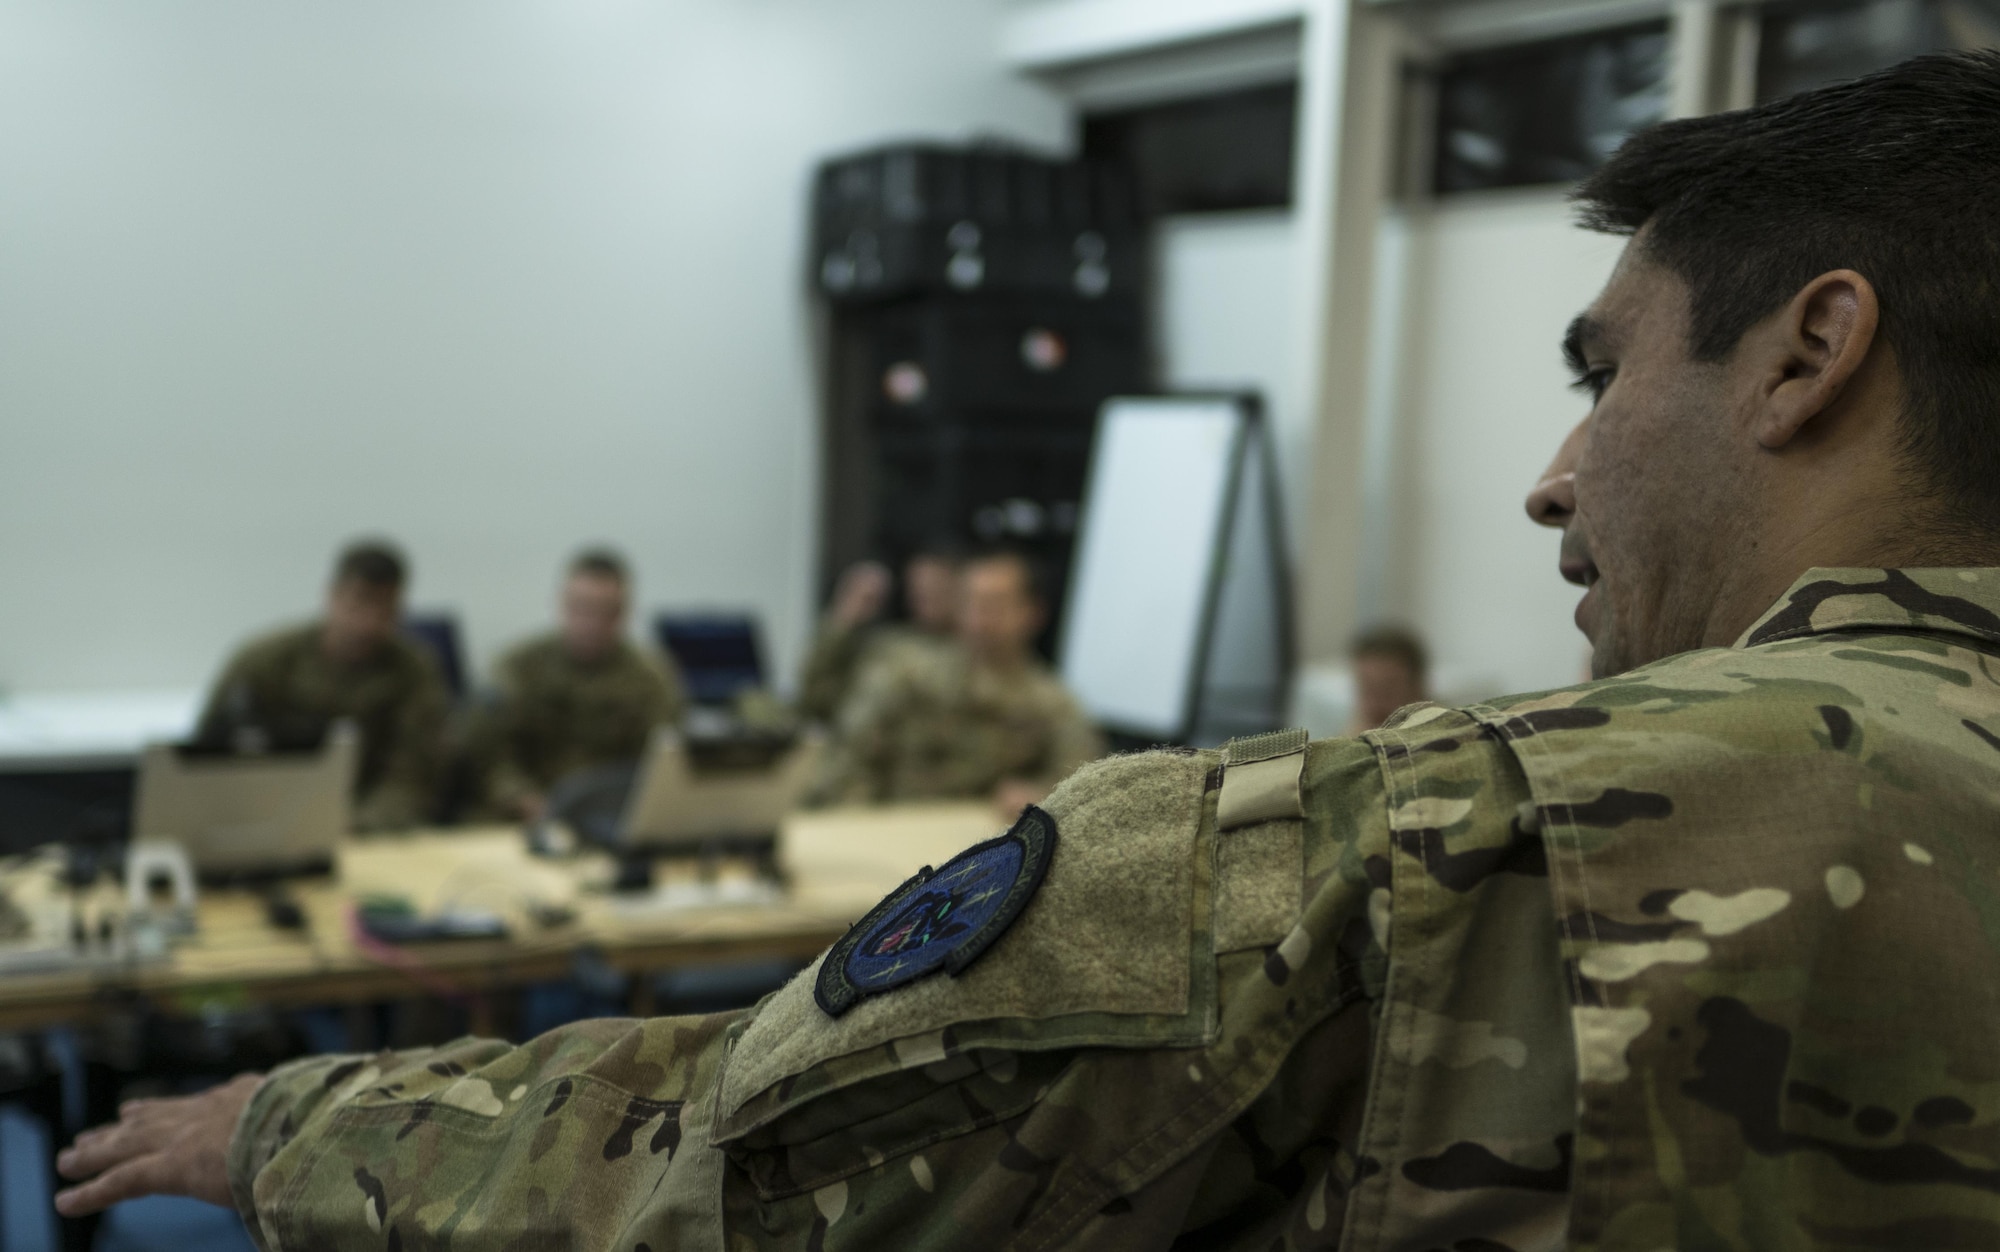 A U.S. Air Force 17th Special Operations Squadron intelligence analyst provides the intel picture of the warfighting scenario to aircrew prior to air operations July 9, 2017, at Rockhampton, Australia. Talisman Saber 2017 provides the relevant training necessary to maintain regional security, peace and stability. (U.S. Air Force photo by Capt. Jessica Tait)